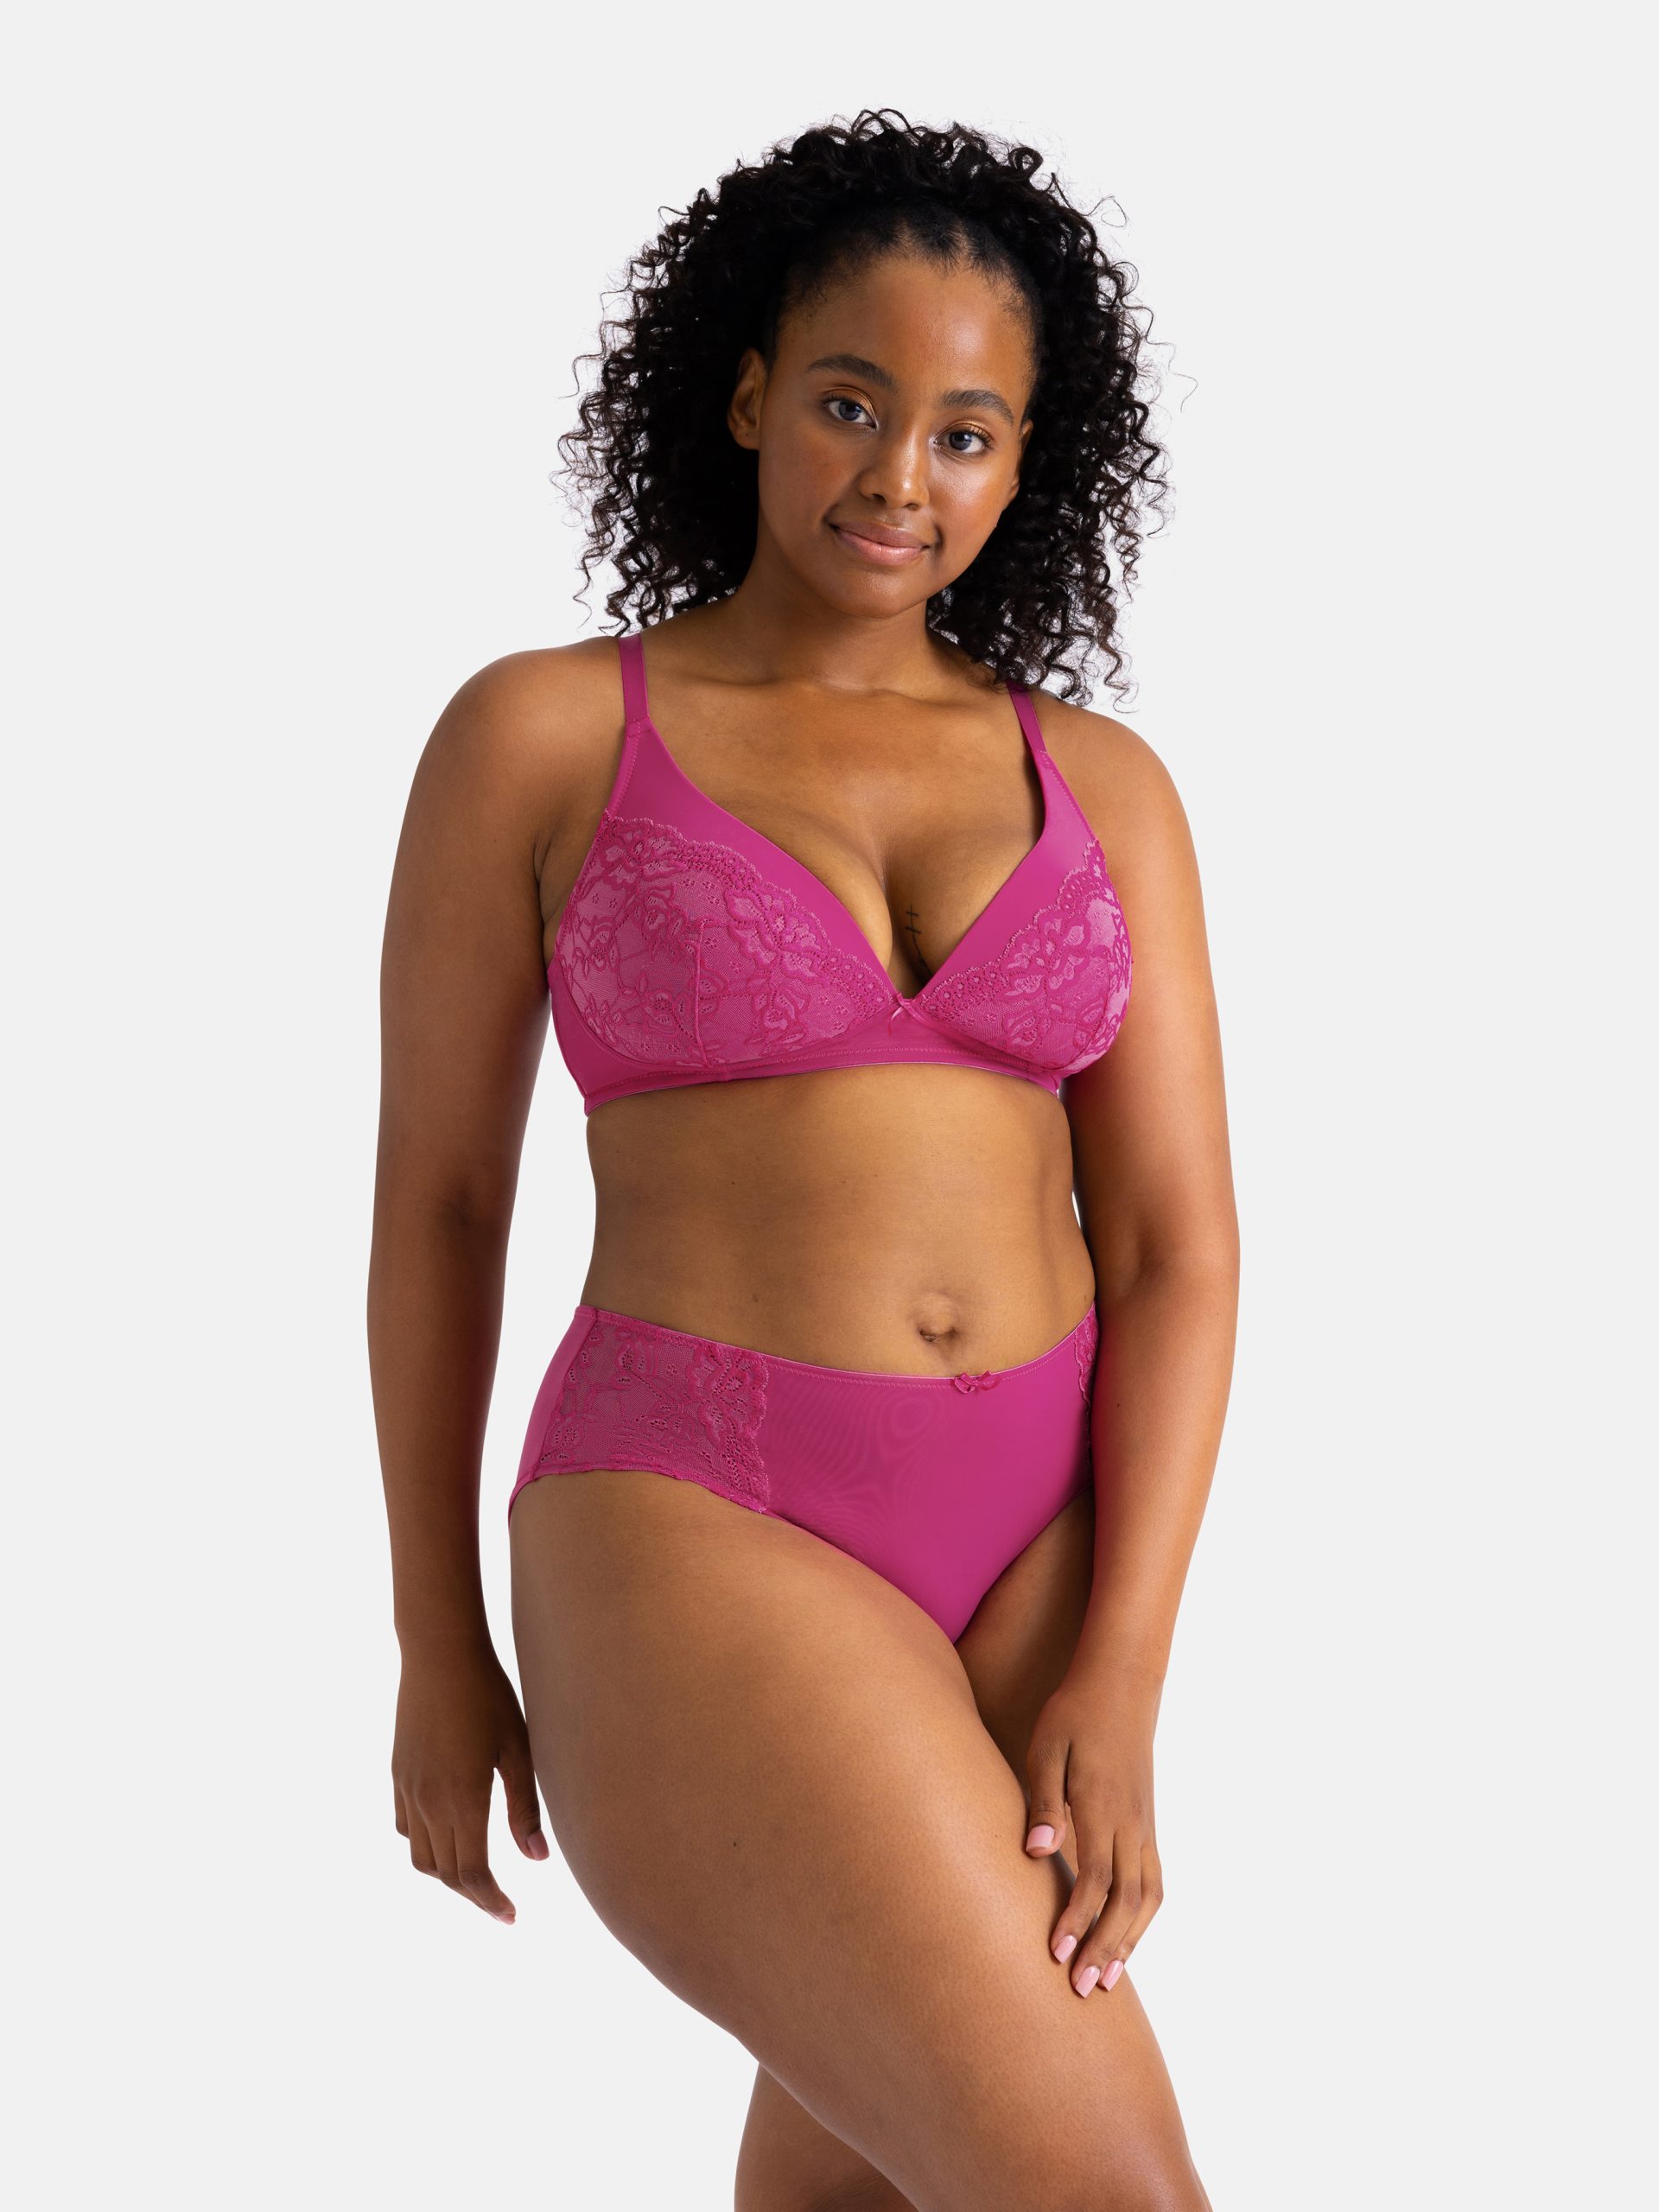 Softline Girl on X: Meet your new lingerie obsession! #Softline's Full  Coverage Padded bras redefine what it means to feel fabulous every day.   #BeASoftlineGirl #FullCoveragePaddedBra #Padded # FullCoverage #Comfort #Confidence